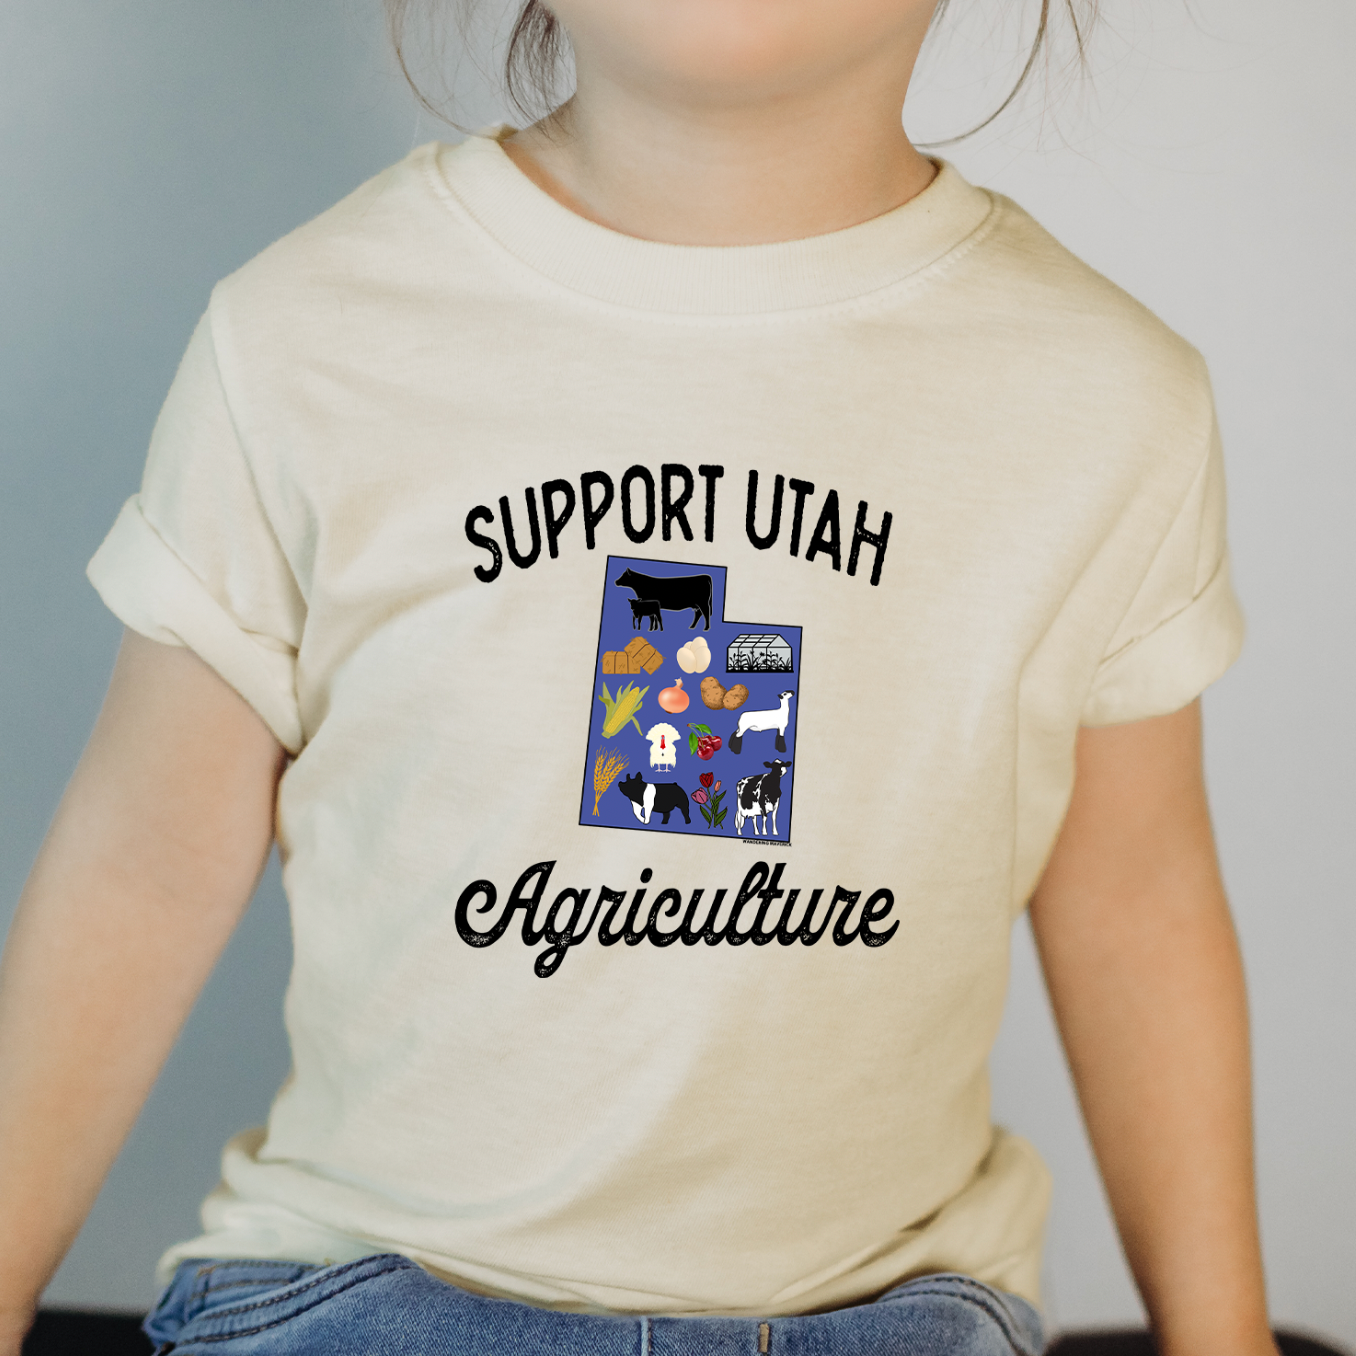 Support Utah Agriculture One Piece/T-Shirt (Newborn - Youth XL) - Multiple Colors!